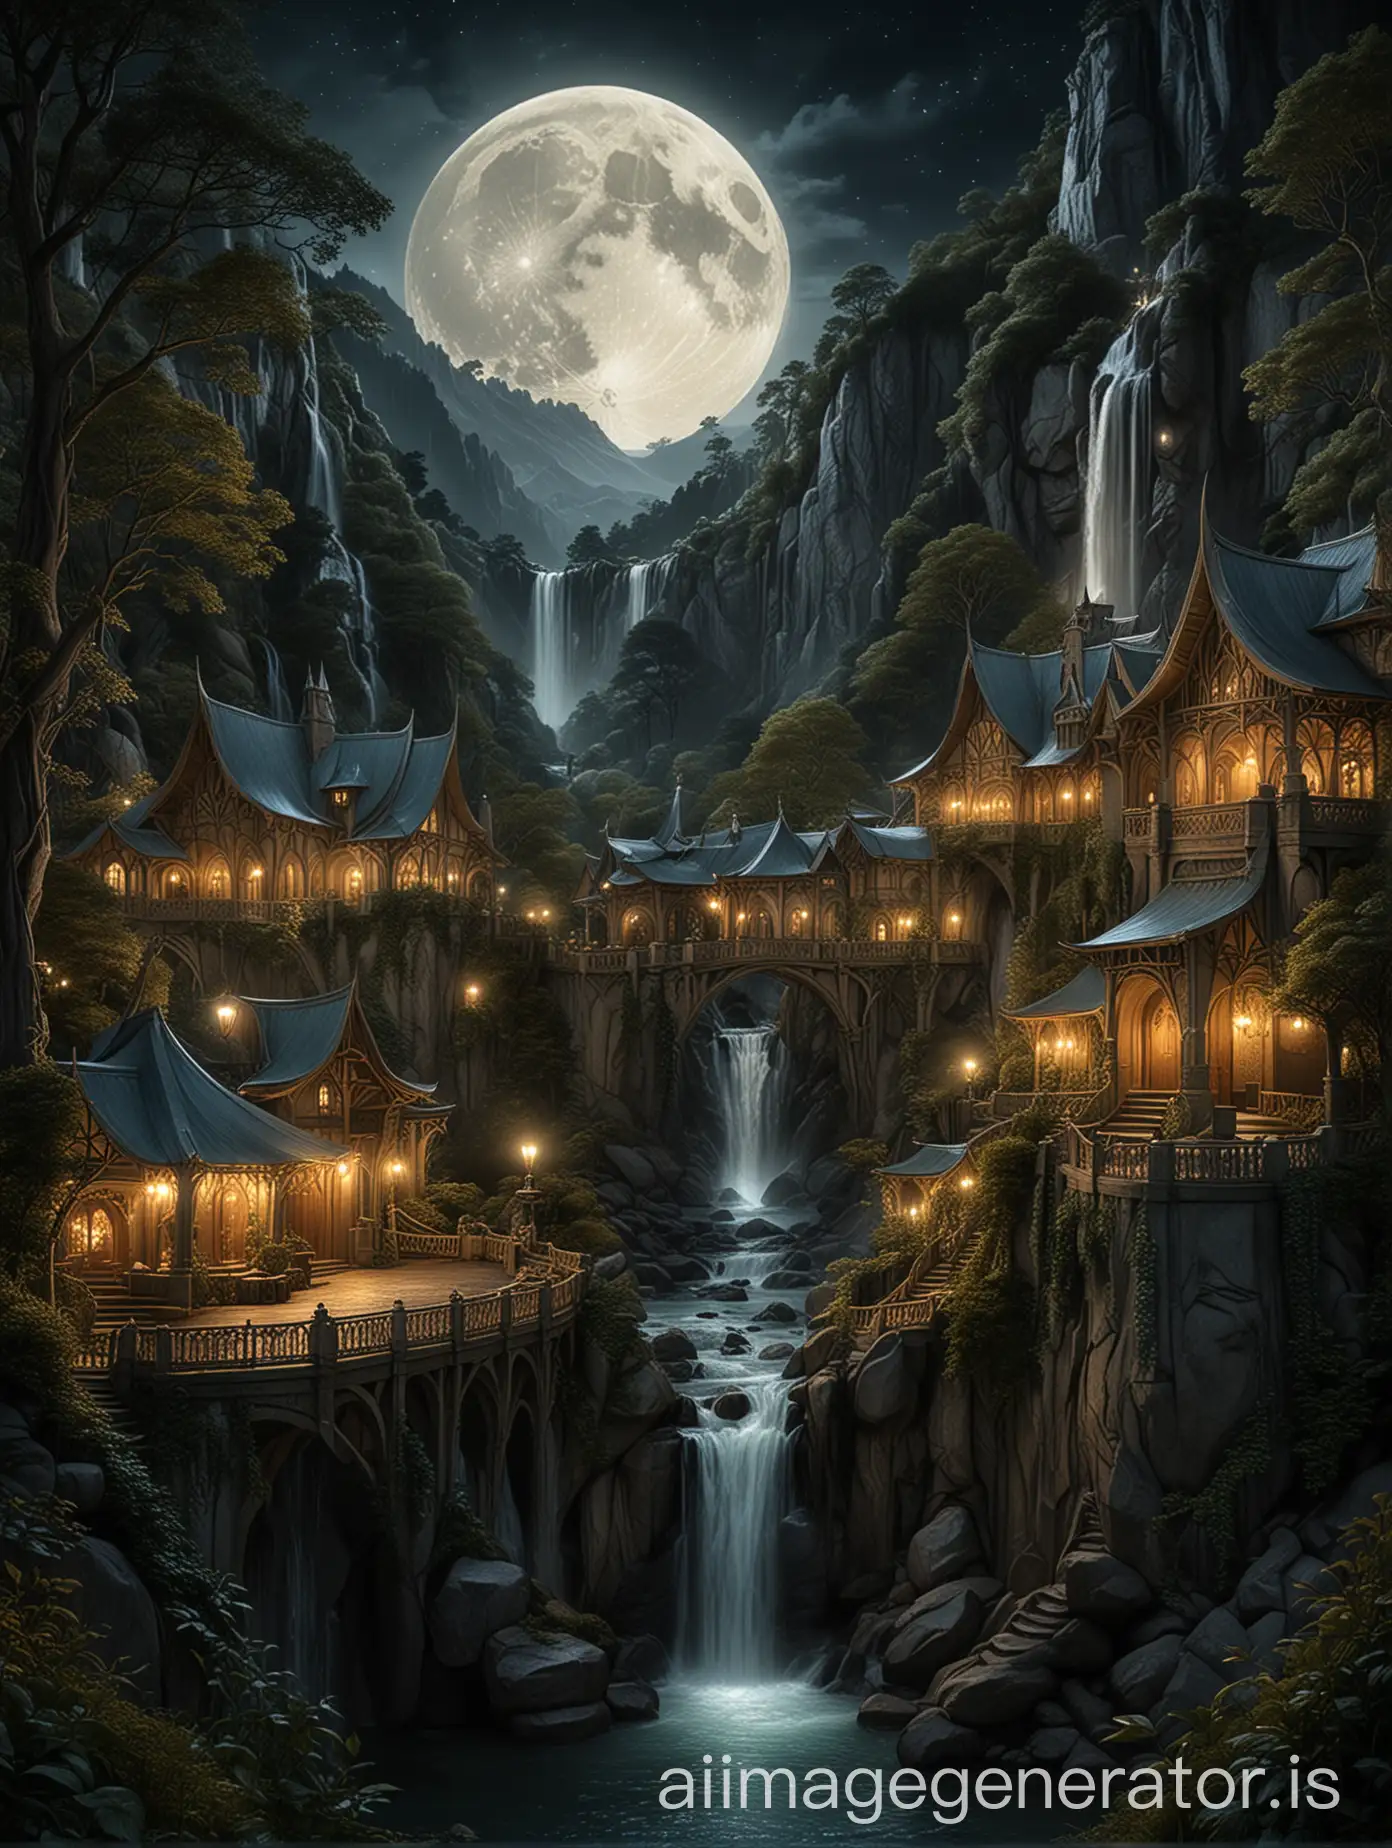 Rivendell illuminated by the moonlight, with elven buildings glowing softly at night, waterfalls shimmering under the moon’s glow, and a serene and mysterious atmosphere